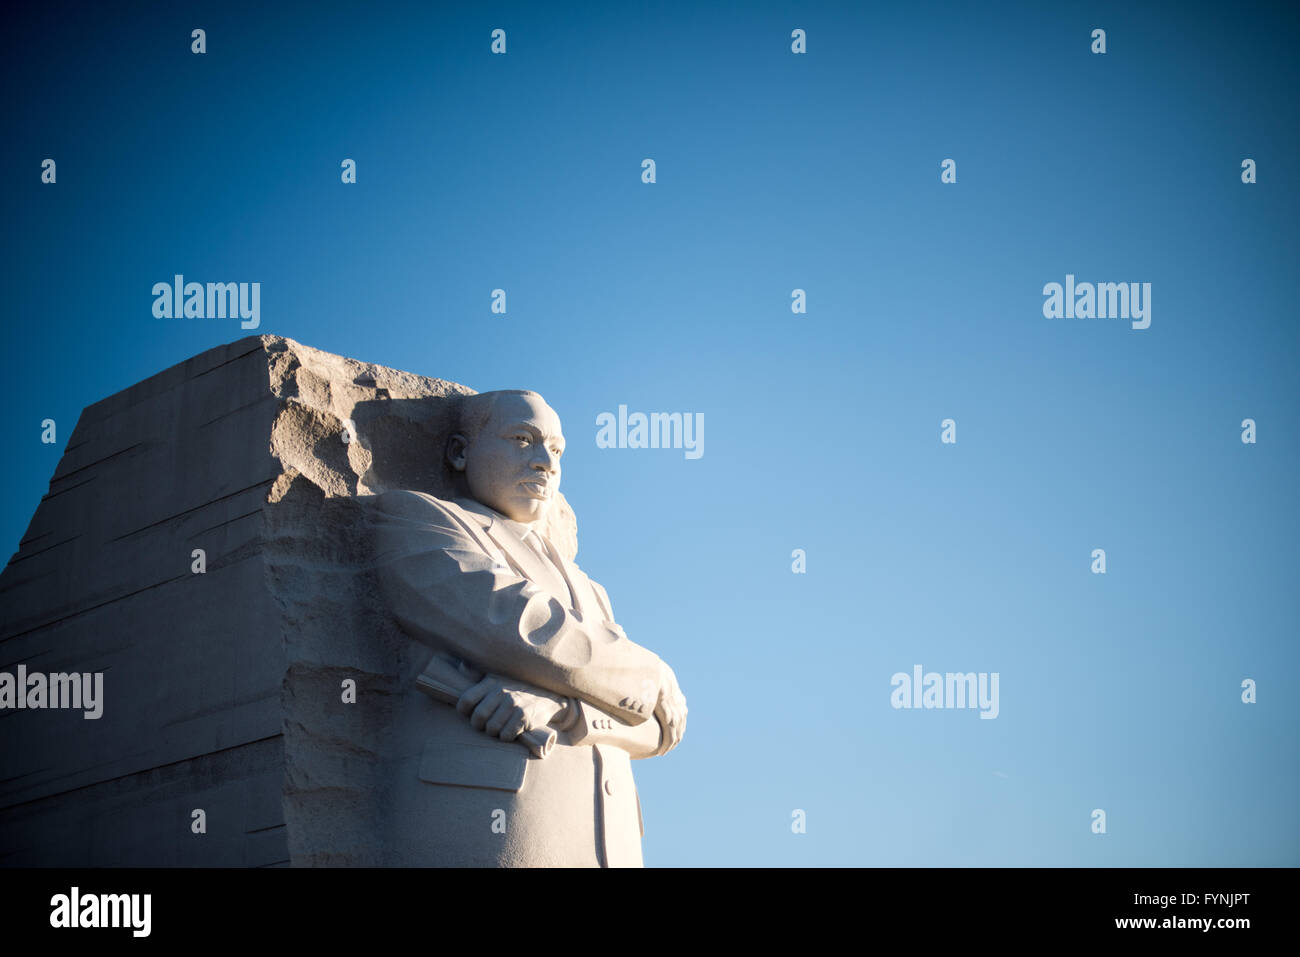 WASHINGTON, DC - The main statue of Dr. Martin Luther King Jr. at the MLK Memorial on the banks of the Tidal Basin in Washington DC. The main statue, by Chinese sculptor Lei Yixin, stands here against a clear blue sky with copyspace. Stock Photo